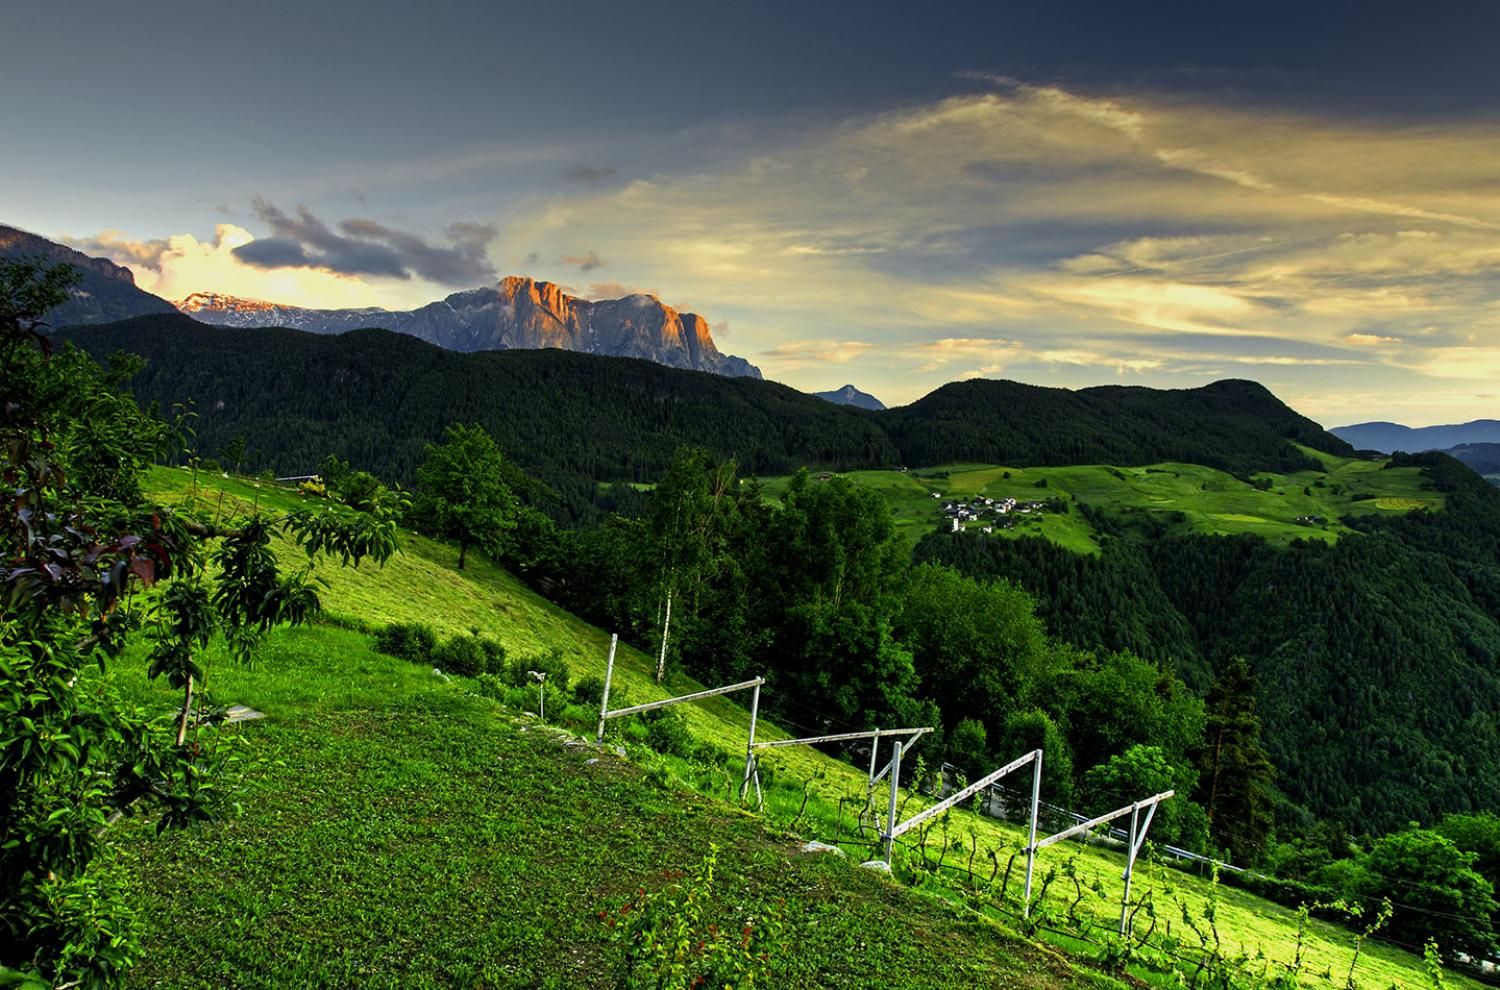 Wonderful views of the magnificent Dolomite mountains